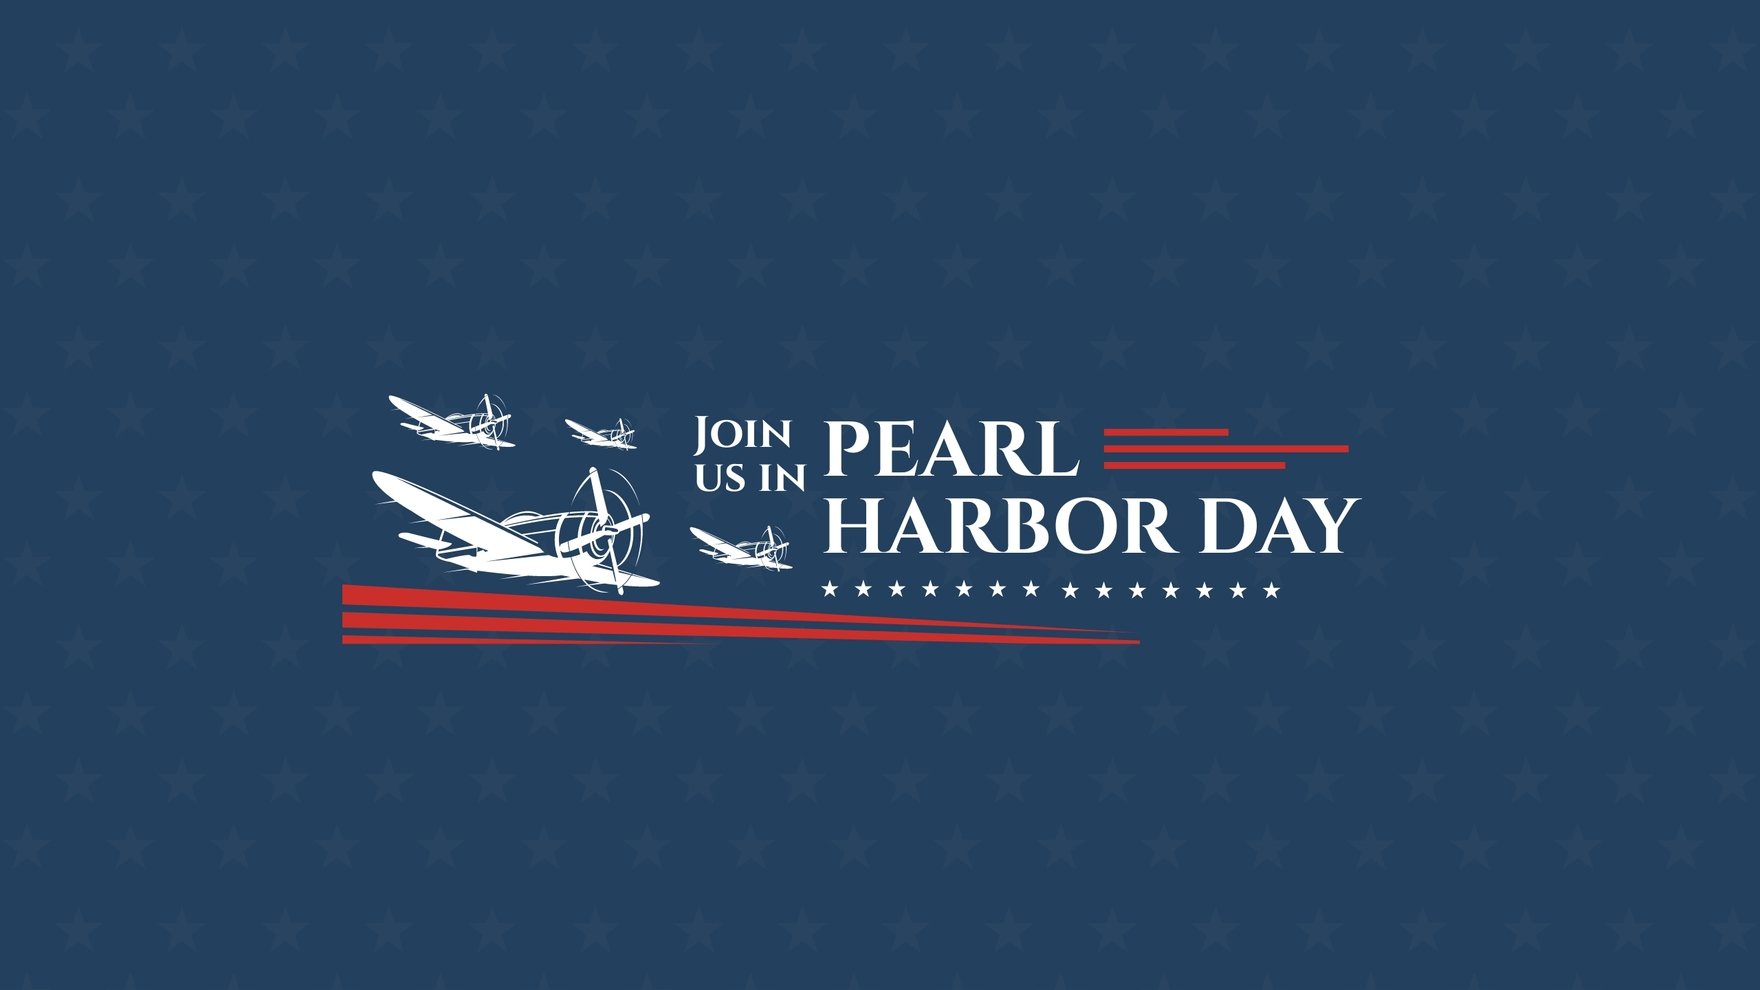 Pearl Harbor Day Event YouTube Banner Template